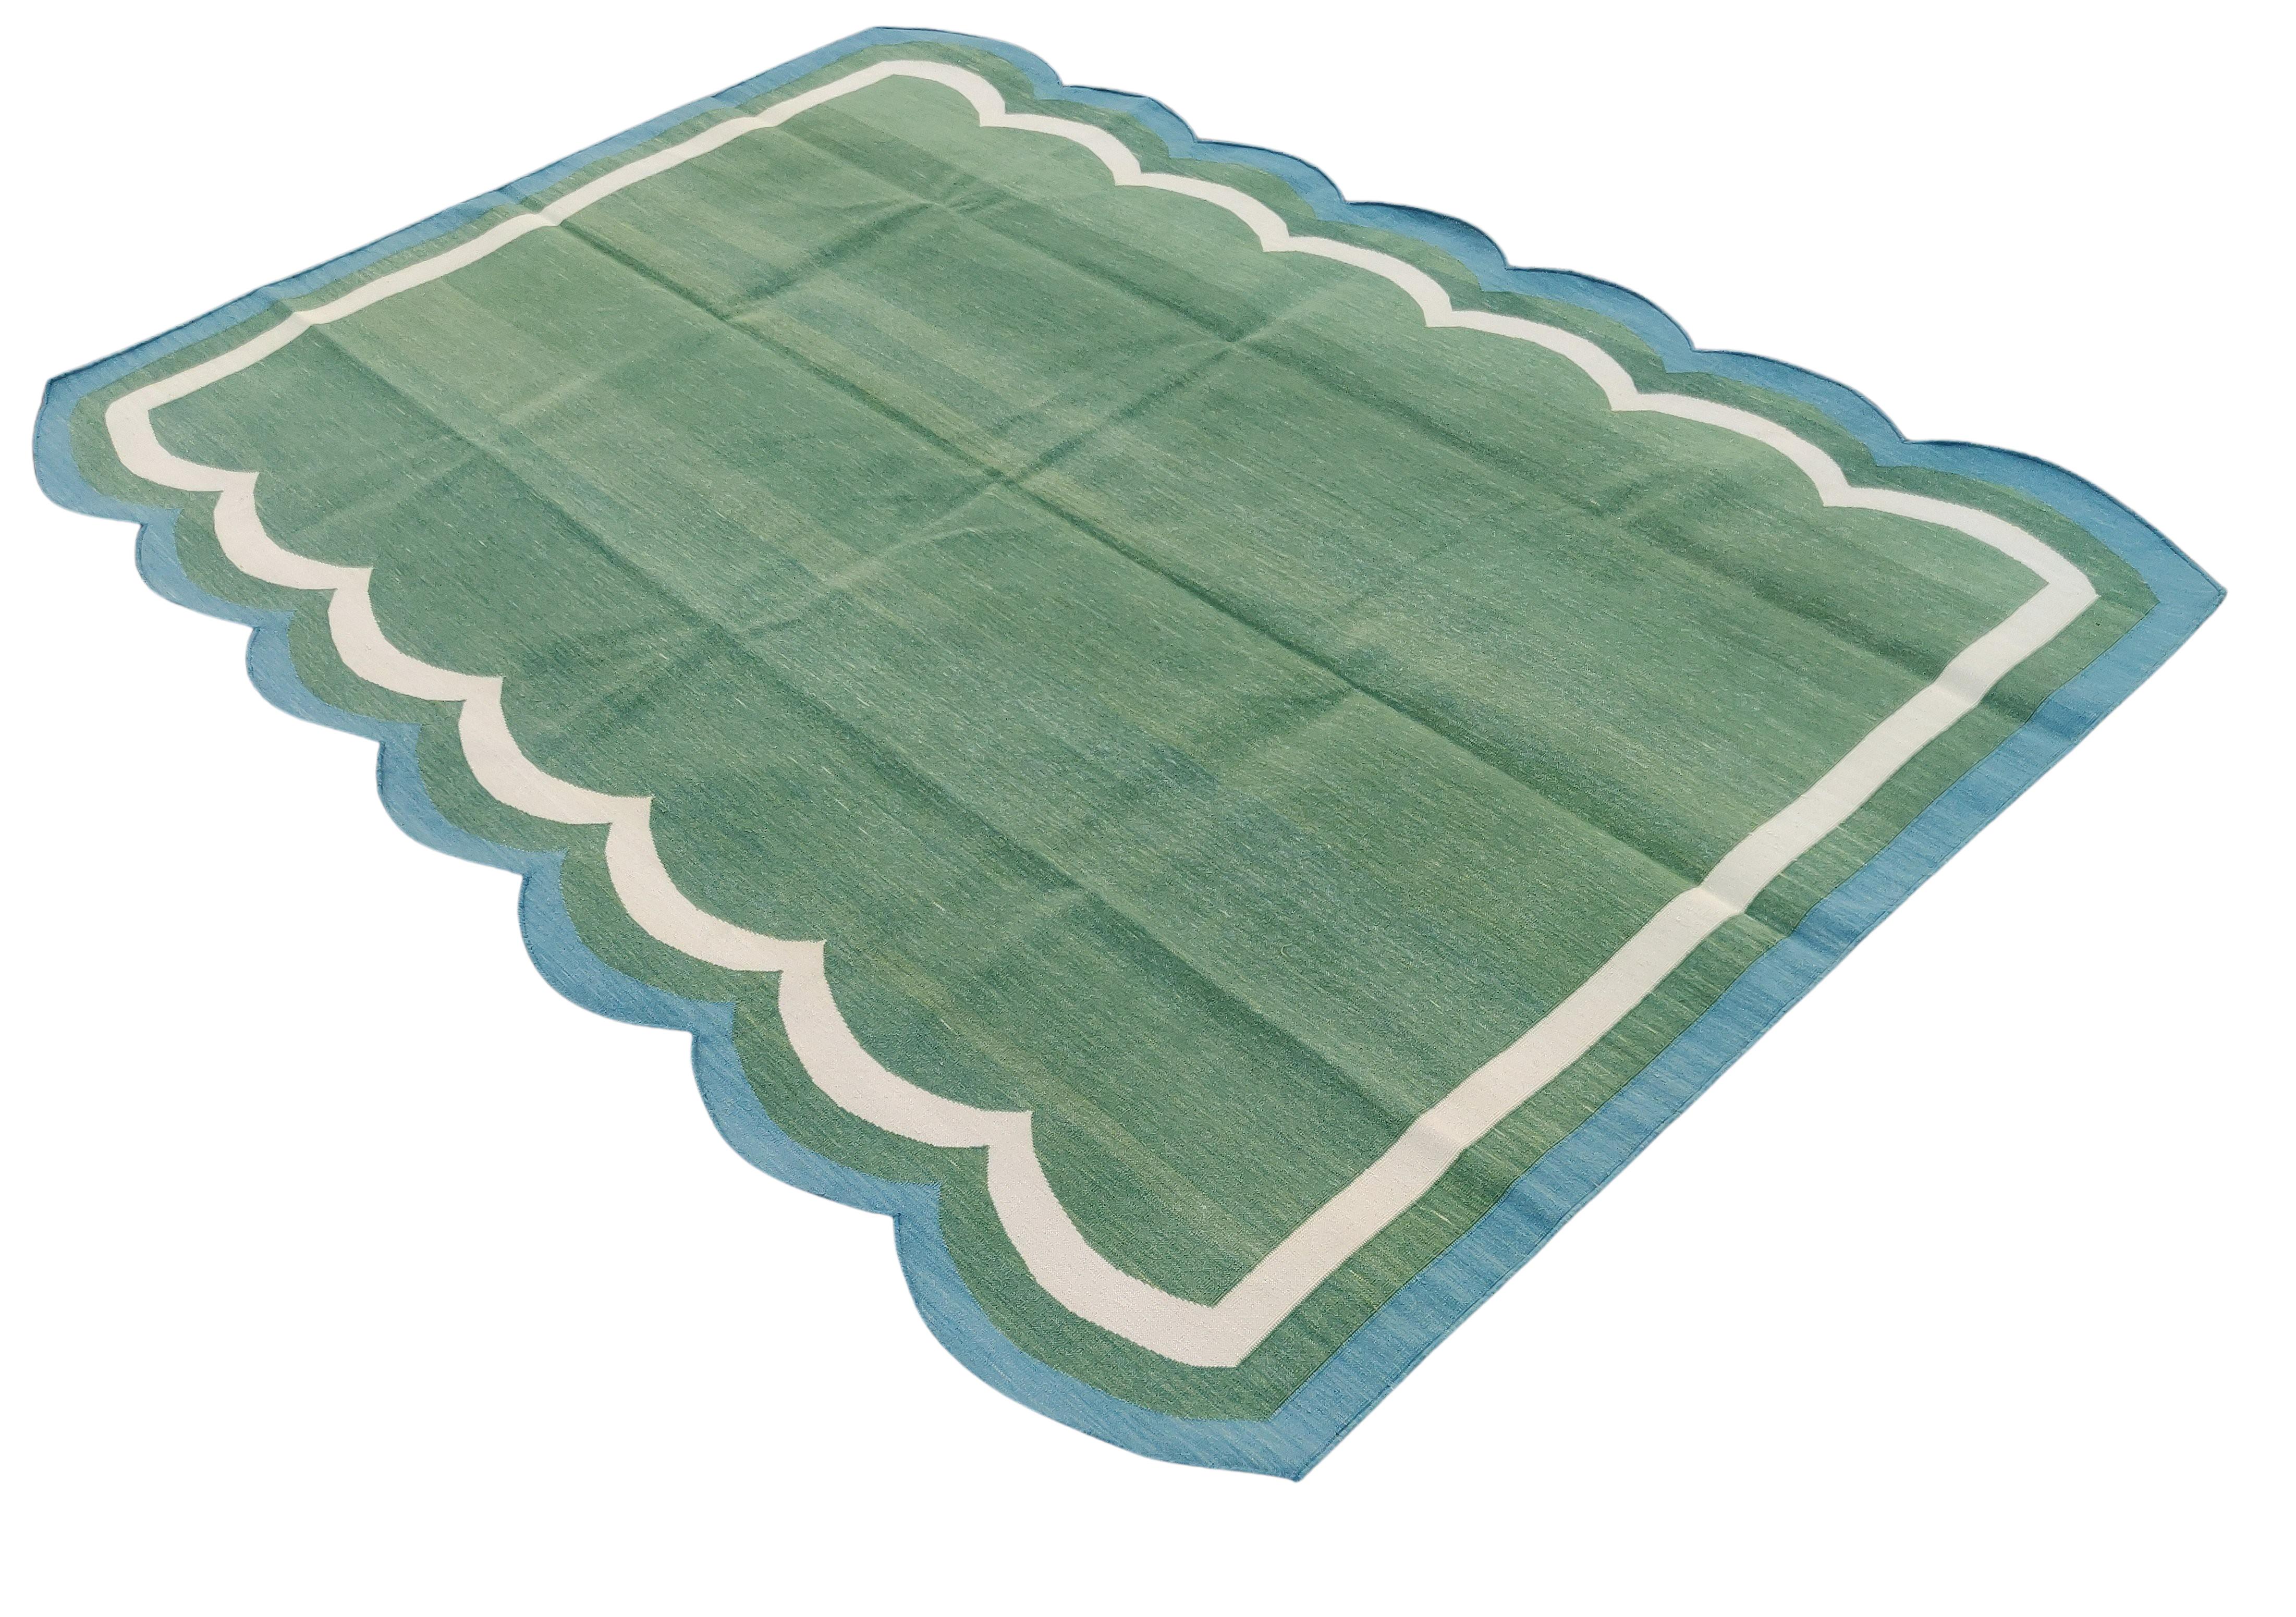 Cotton Natural Vegetable Dyed, Forest Green, Cream And Blue Scalloped Striped Indian Rug - 5'x7'
These special flat-weave dhurries are hand-woven with 15 ply 100% cotton yarn. Due to the special manufacturing techniques used to create our rugs, the